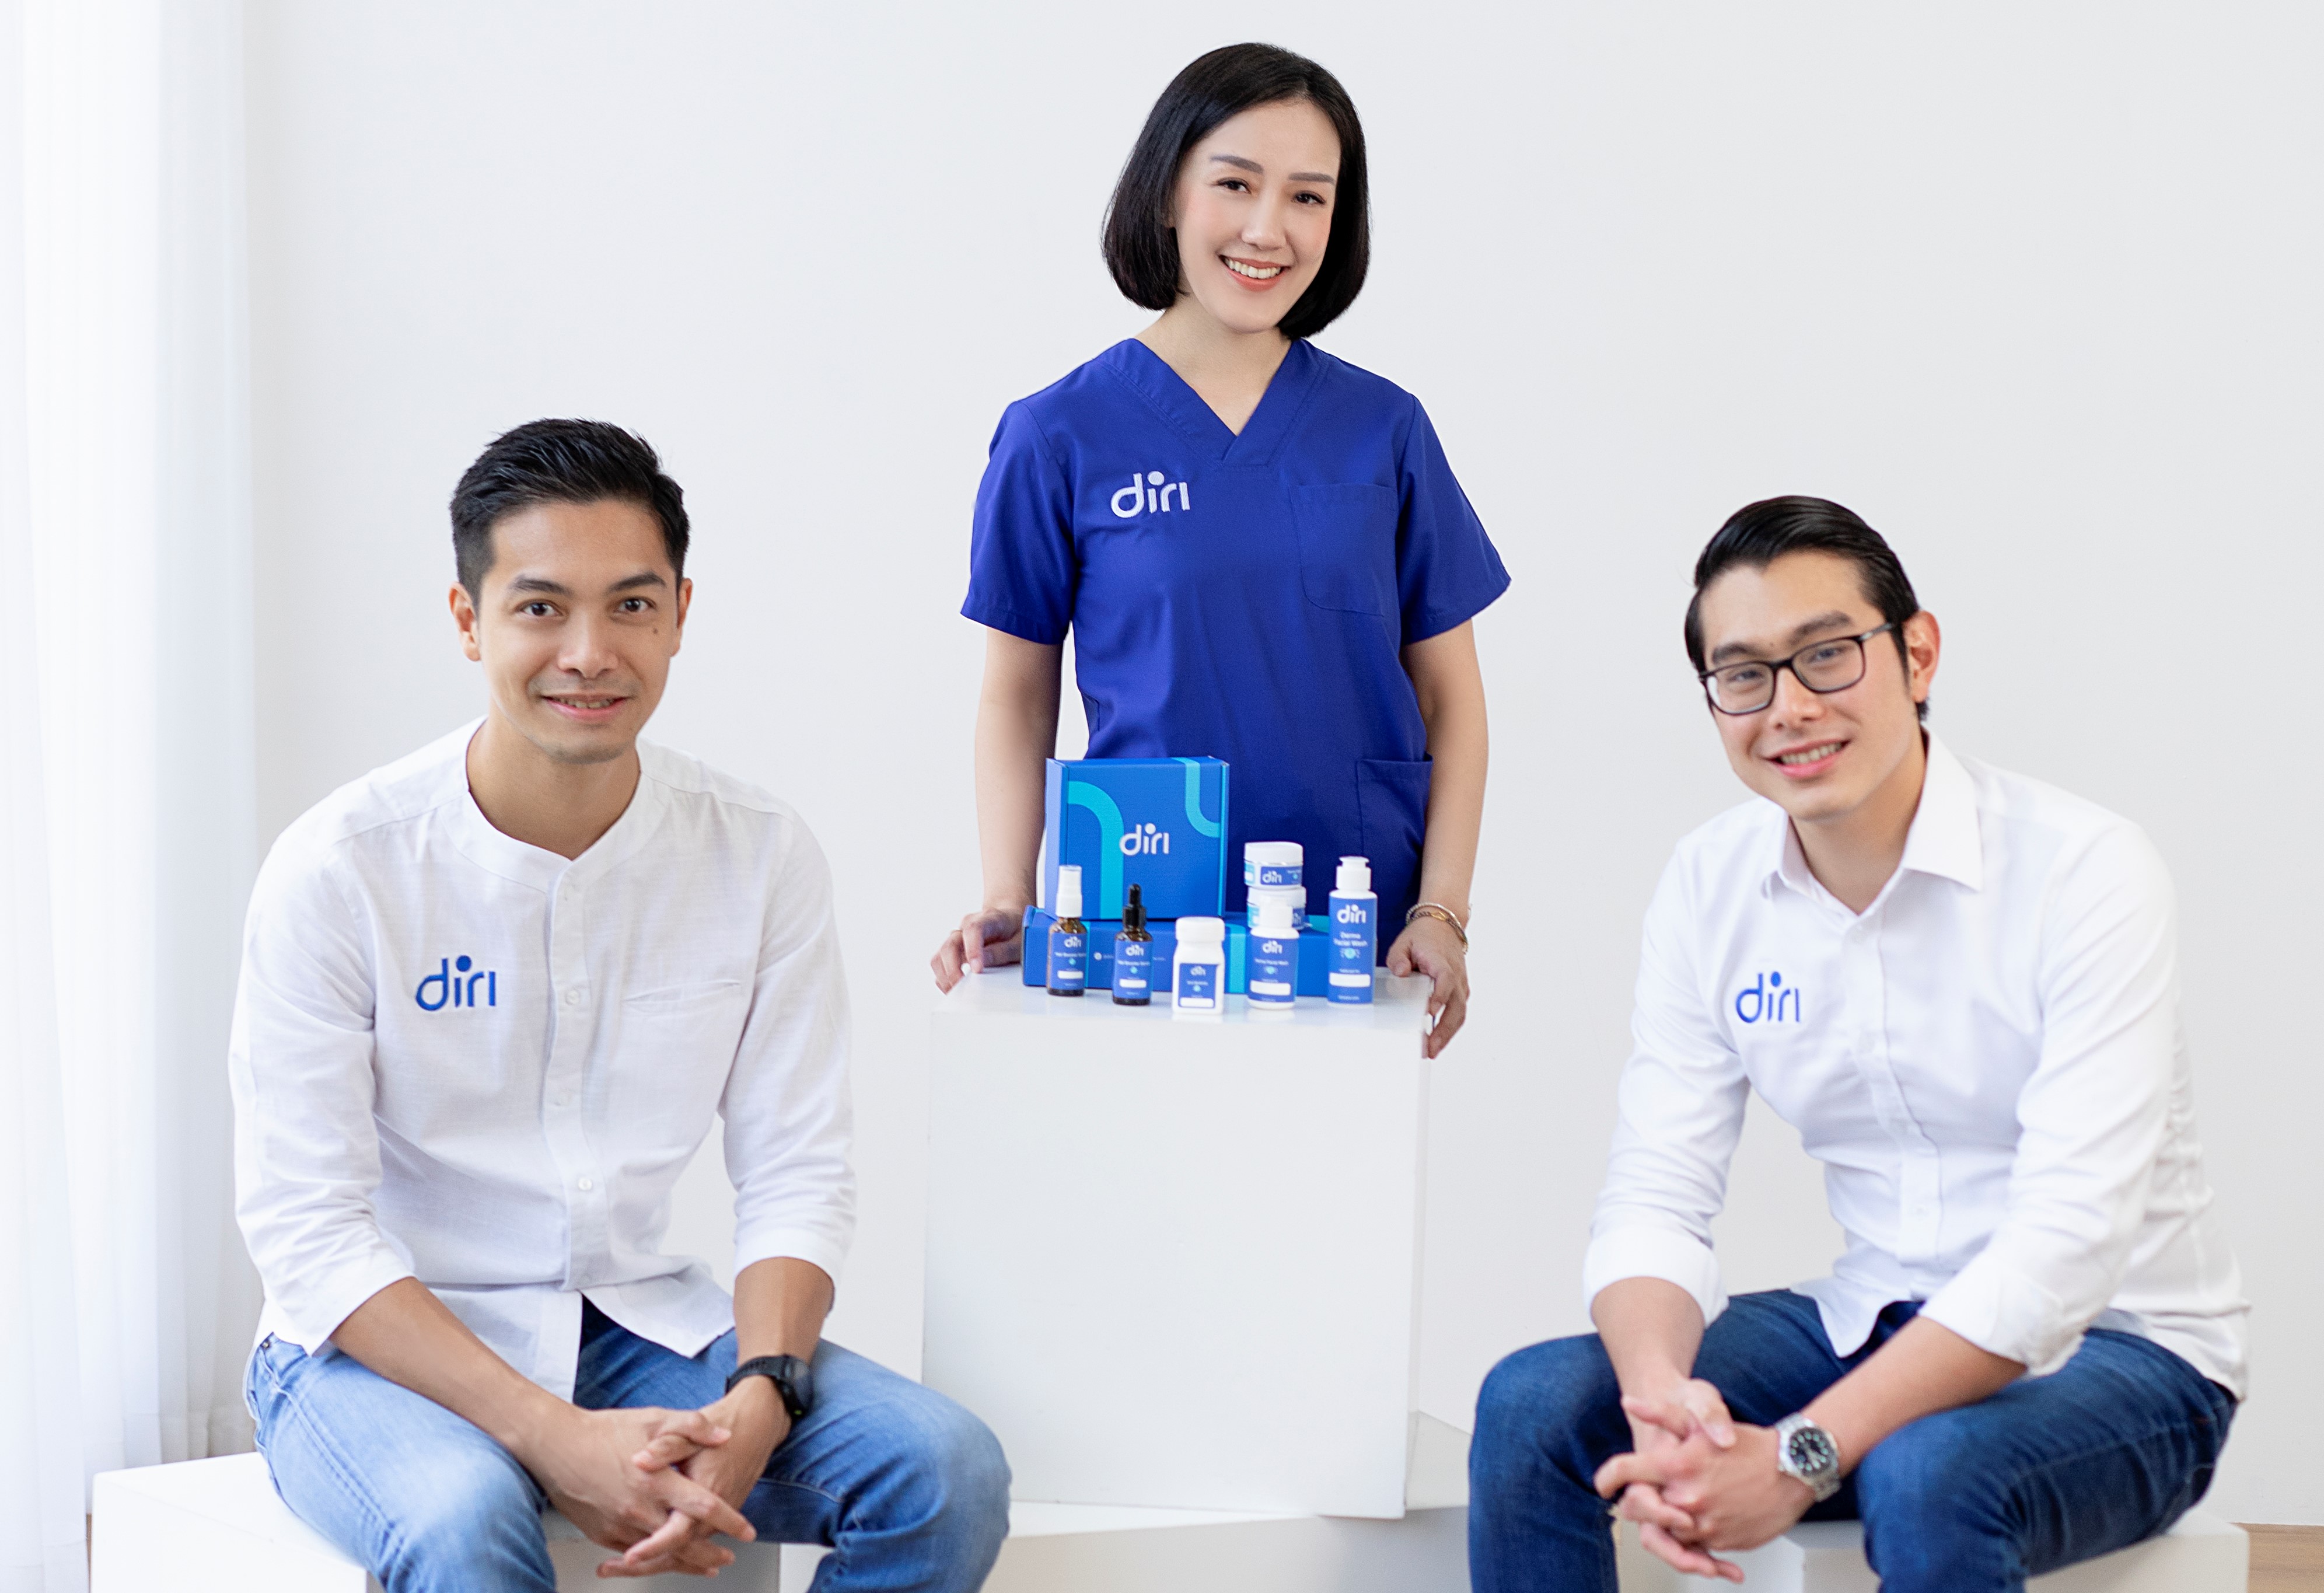 From L-R: Christian Suwarna (co-founder & chief executive officer), Dr. Deviana Himawan (co-founder & chief clinical officer), Armand Amadeus (co-founder & chief operating officer)